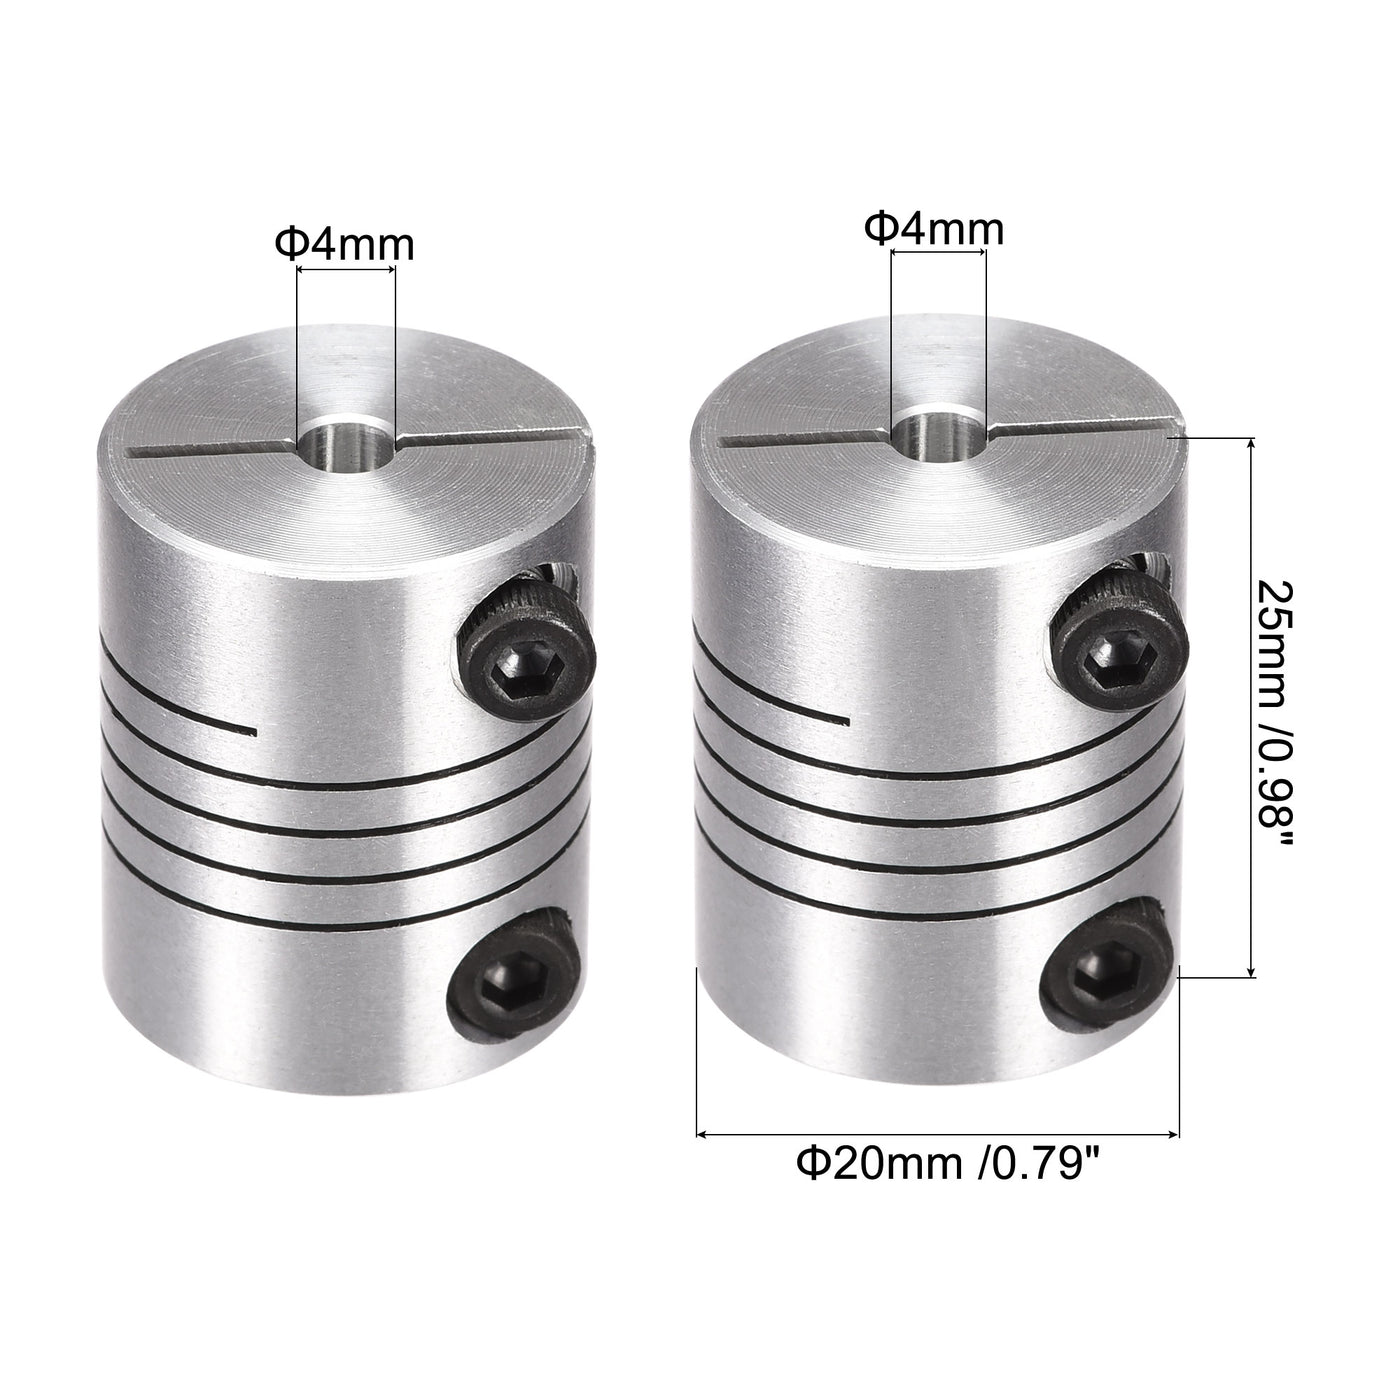 uxcell Uxcell 2PCS Motor Shaft 4mm to 4mm Helical Beam Coupler Coupling 20mm Dia 25mm Length